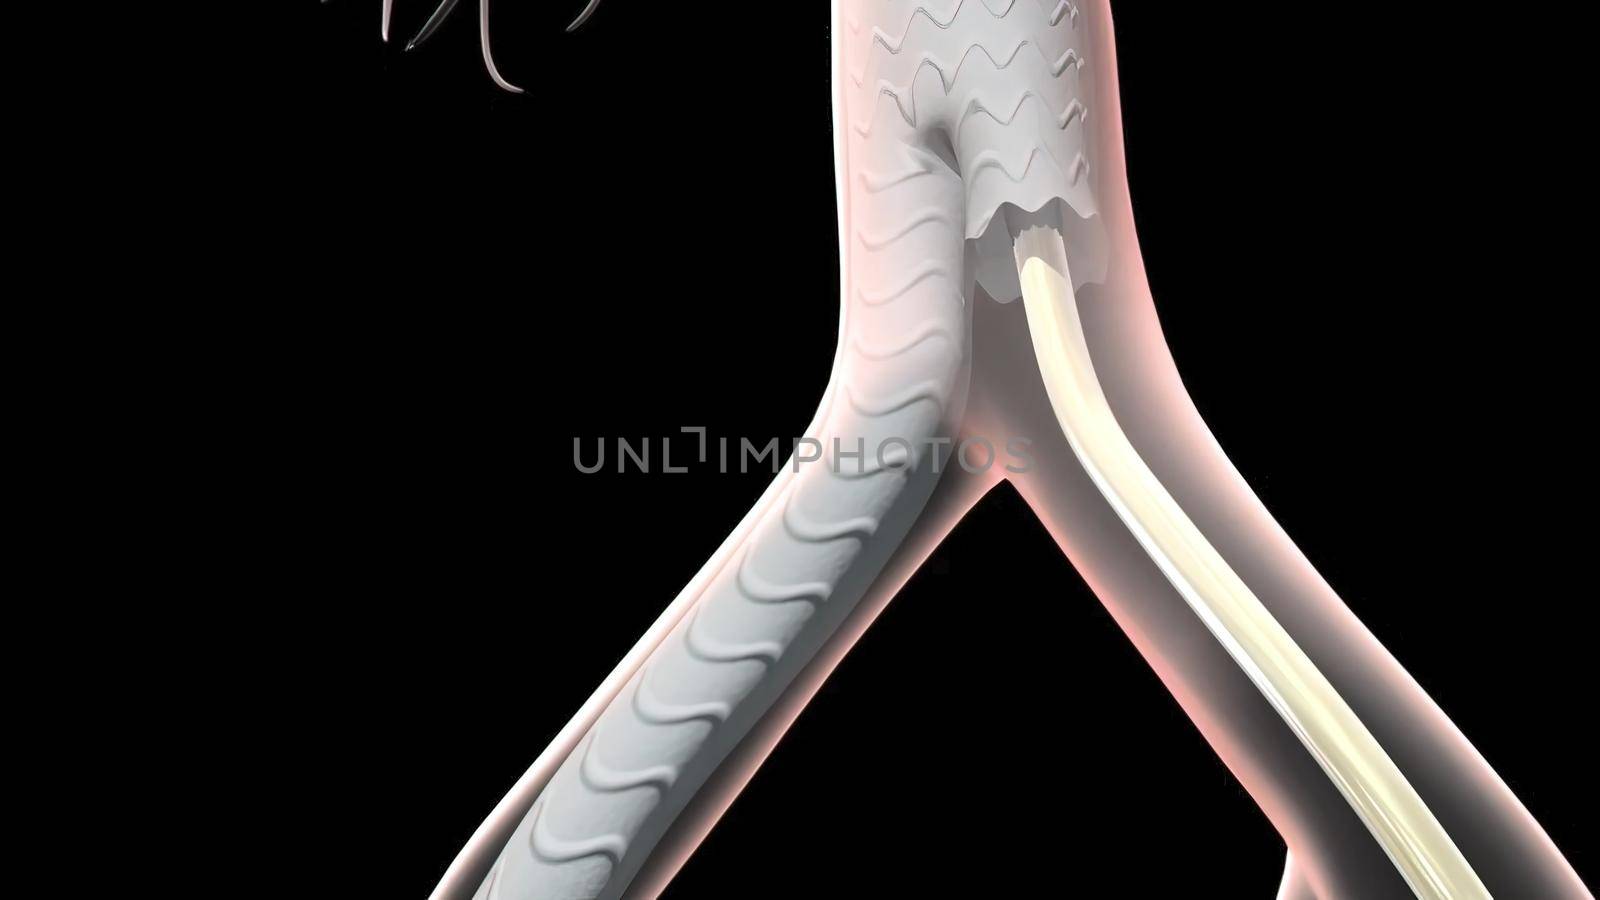 abdominal aortic aneurysm treatment by creativepic